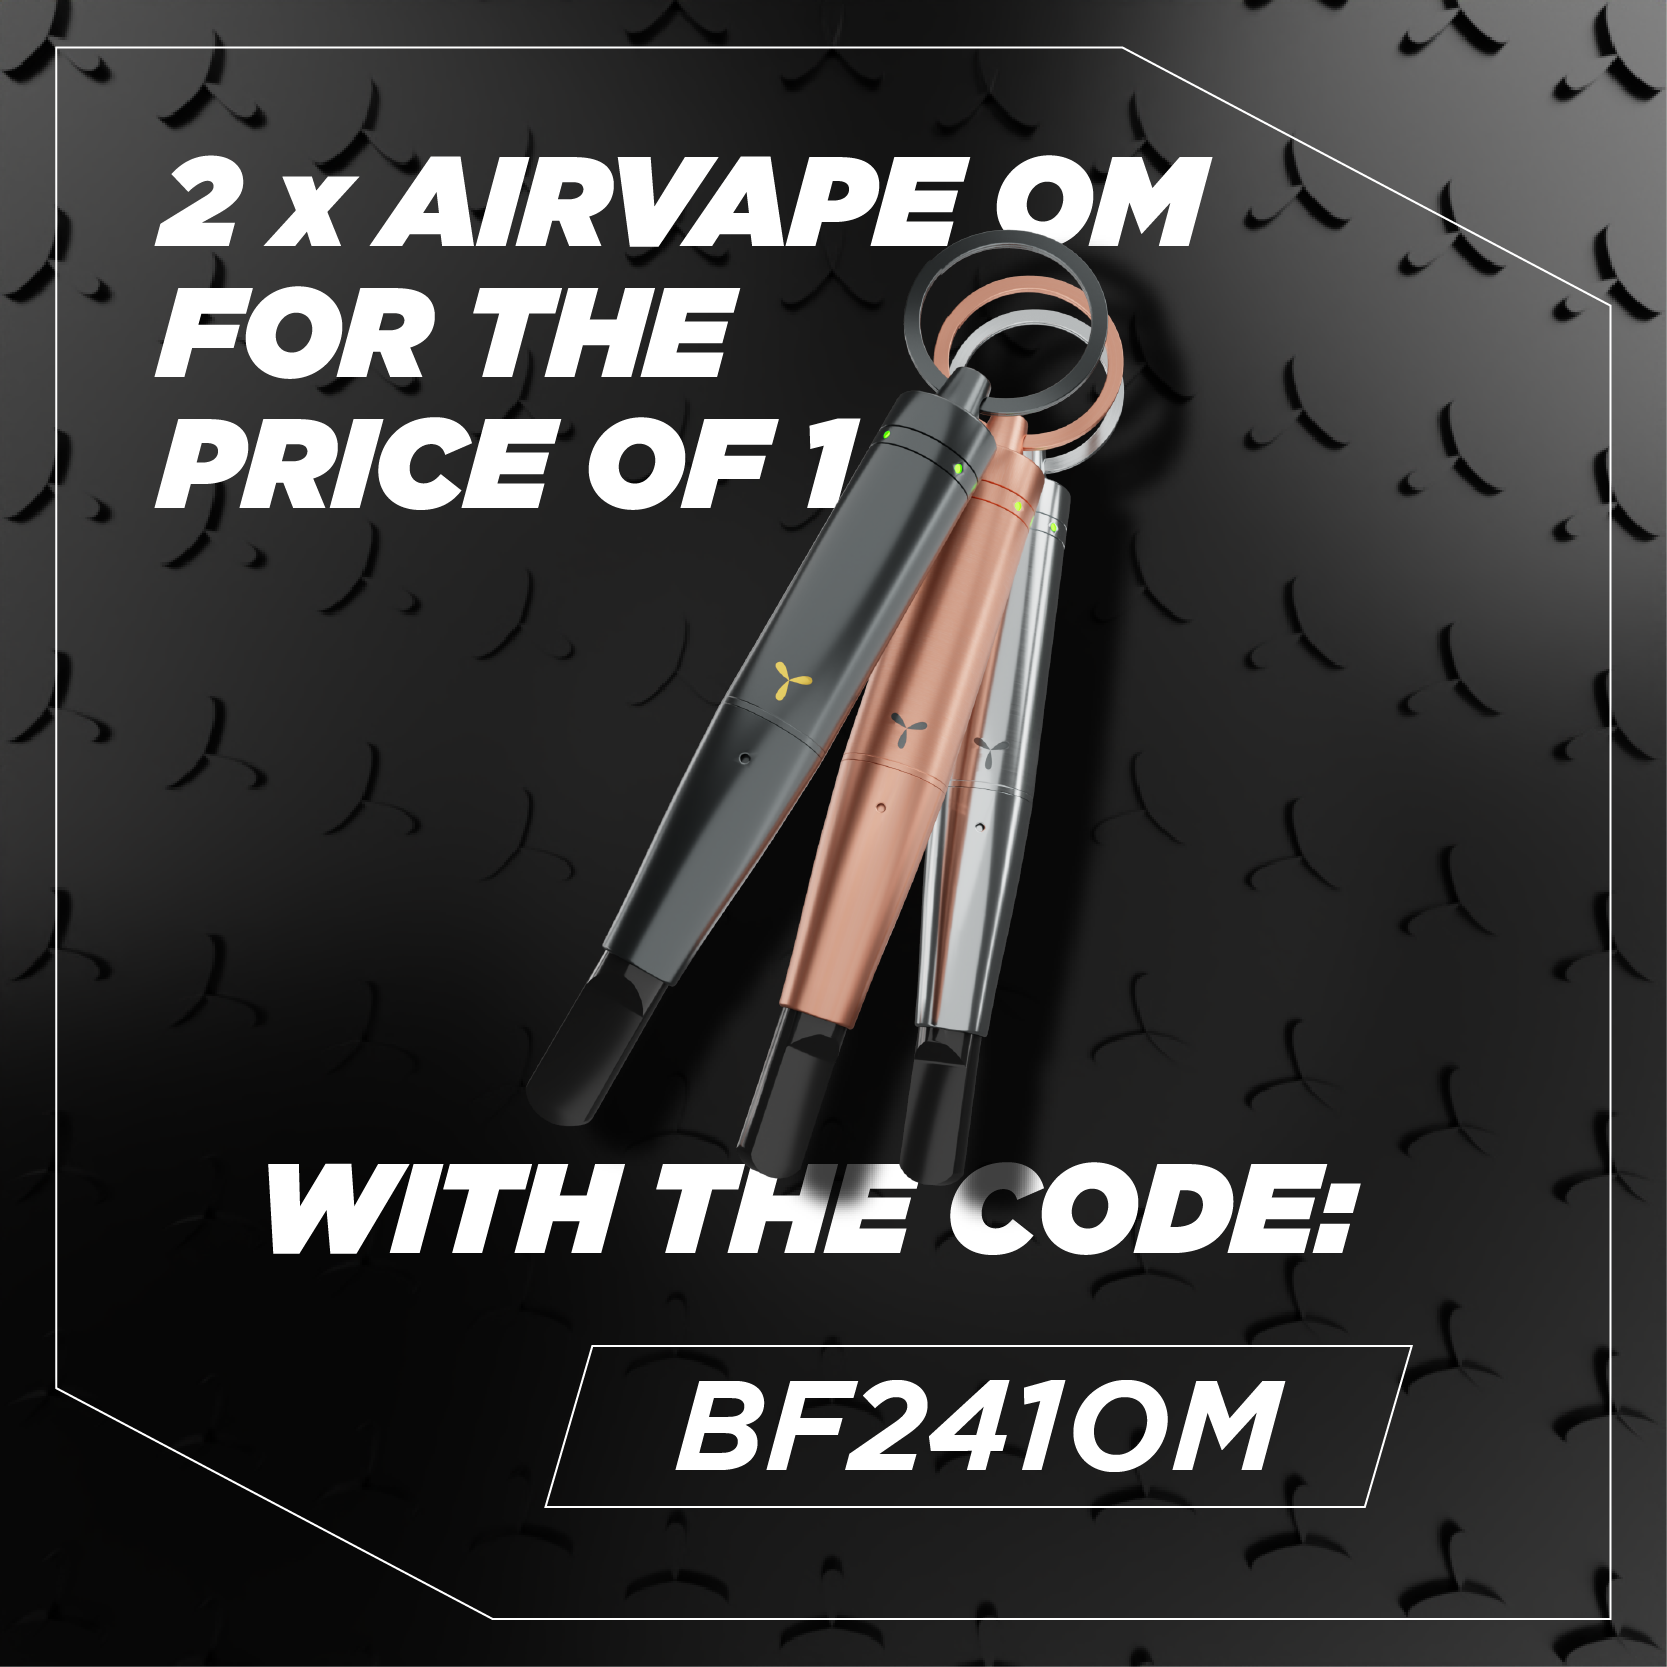 Get 2 Airvape OM units for the price of one with the code BF241OM